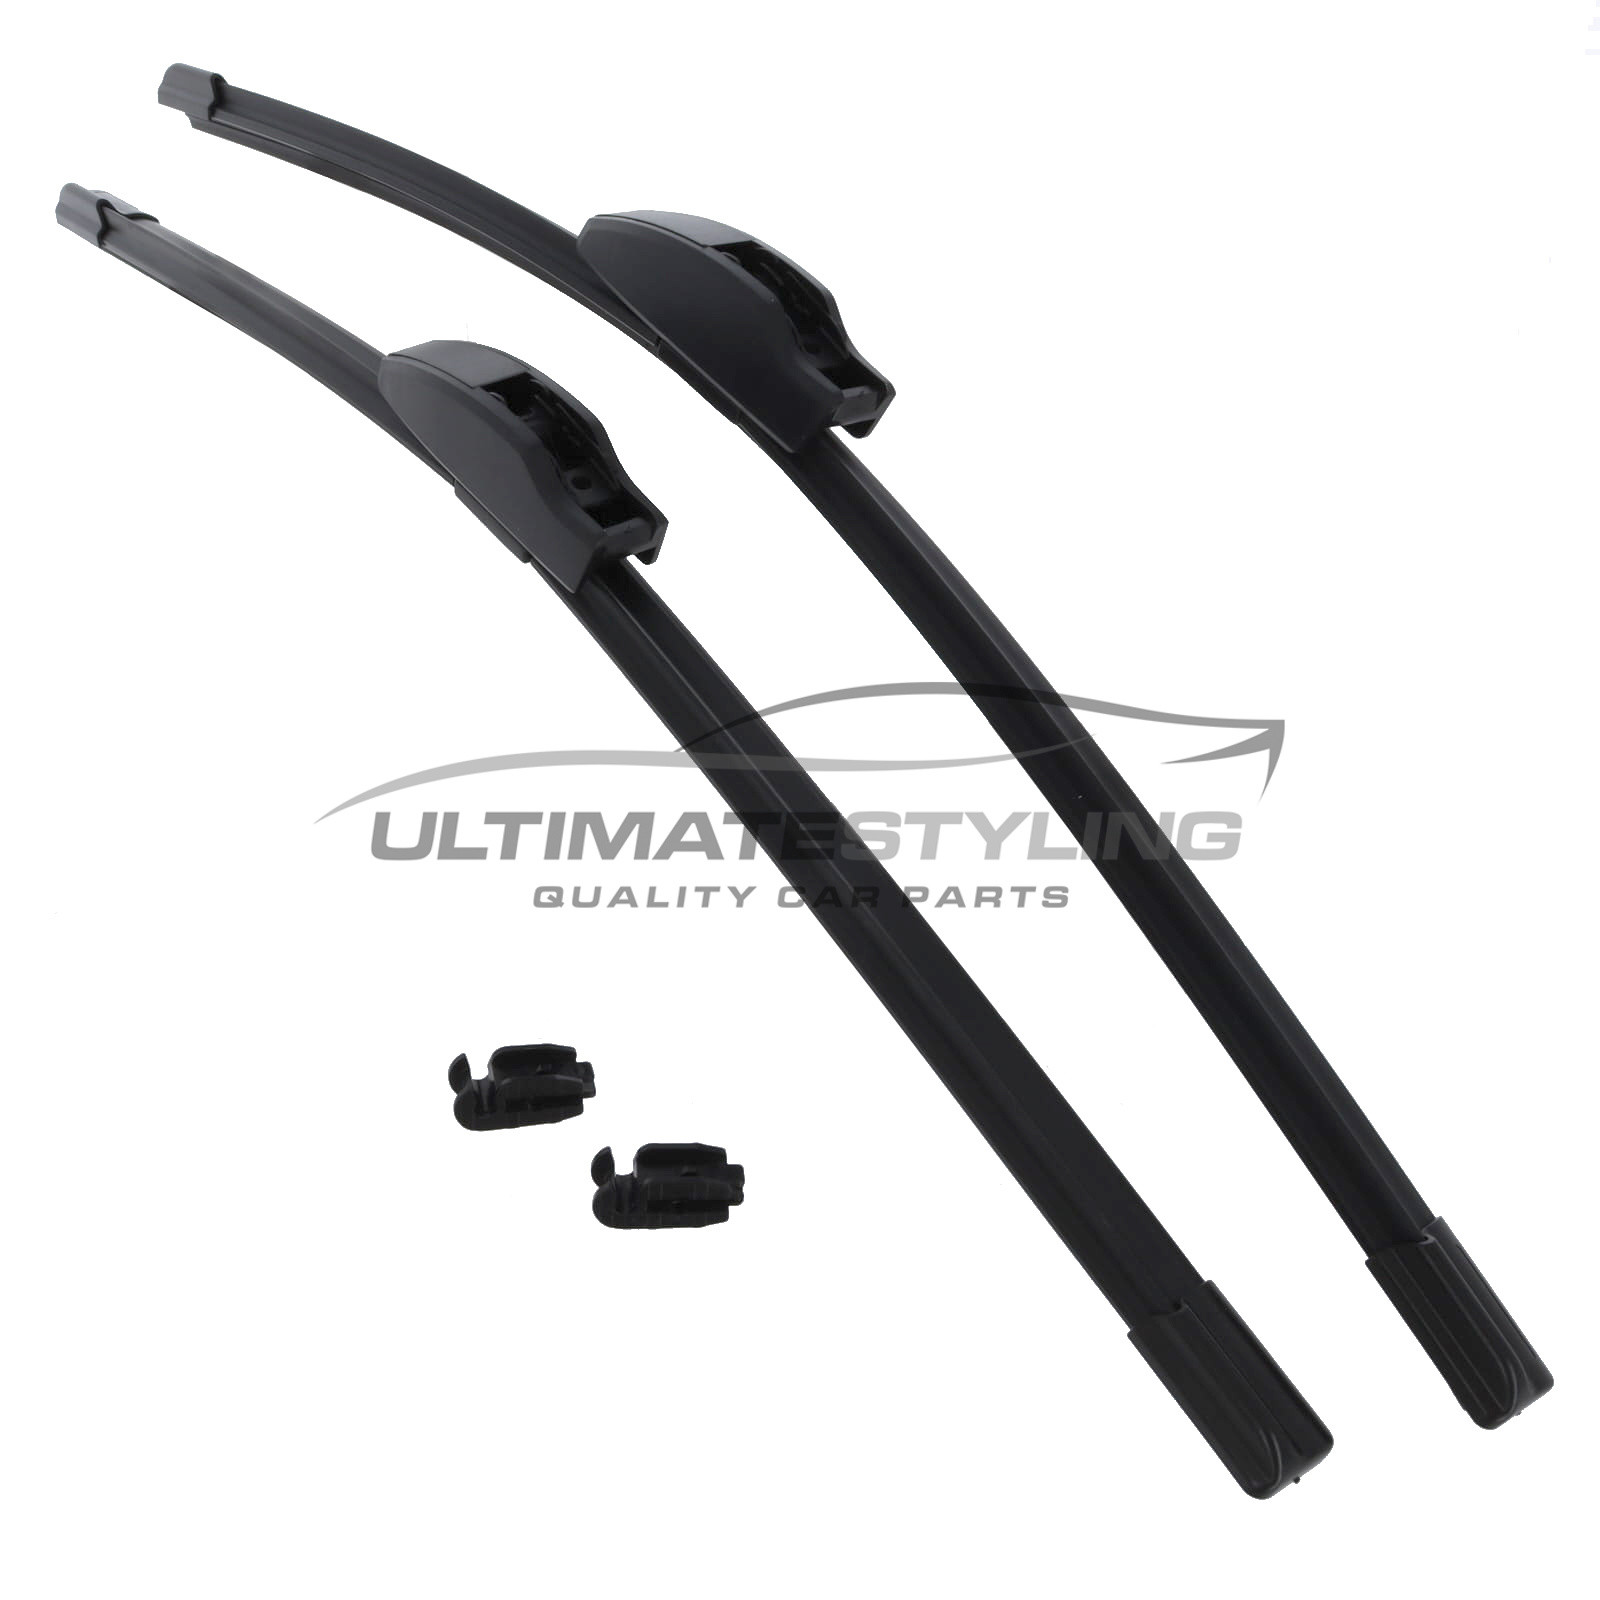 Drivers Side & Passenger Side (Front) Wiper Blades for Vauxhall Astra